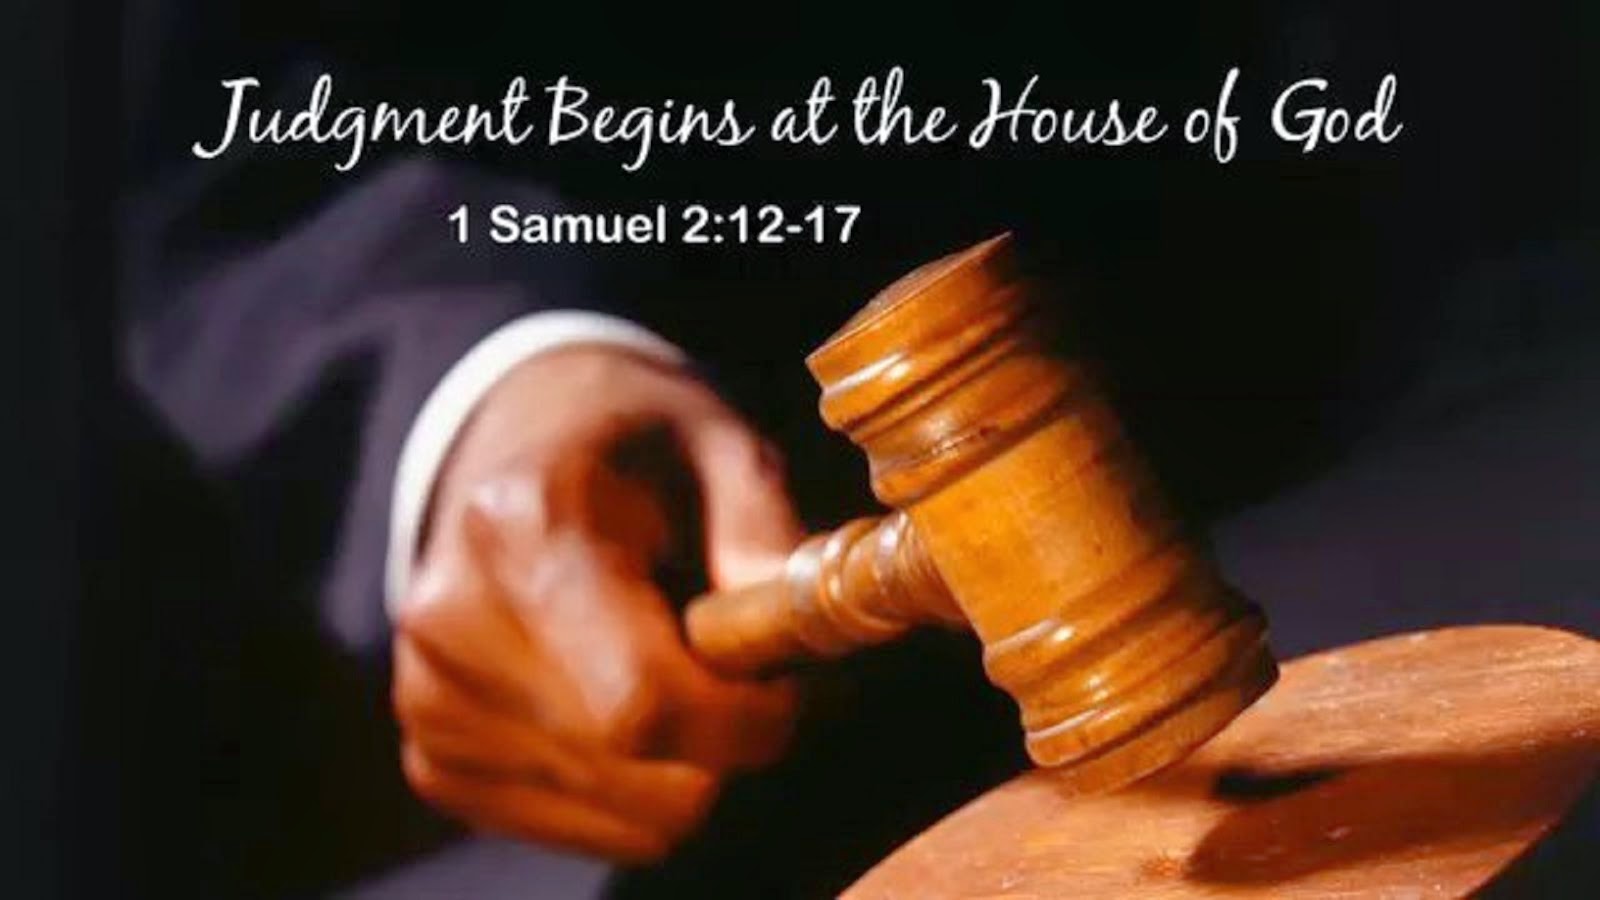 JUDGEMENT NEGINS AT THE HOUSE OF GOD